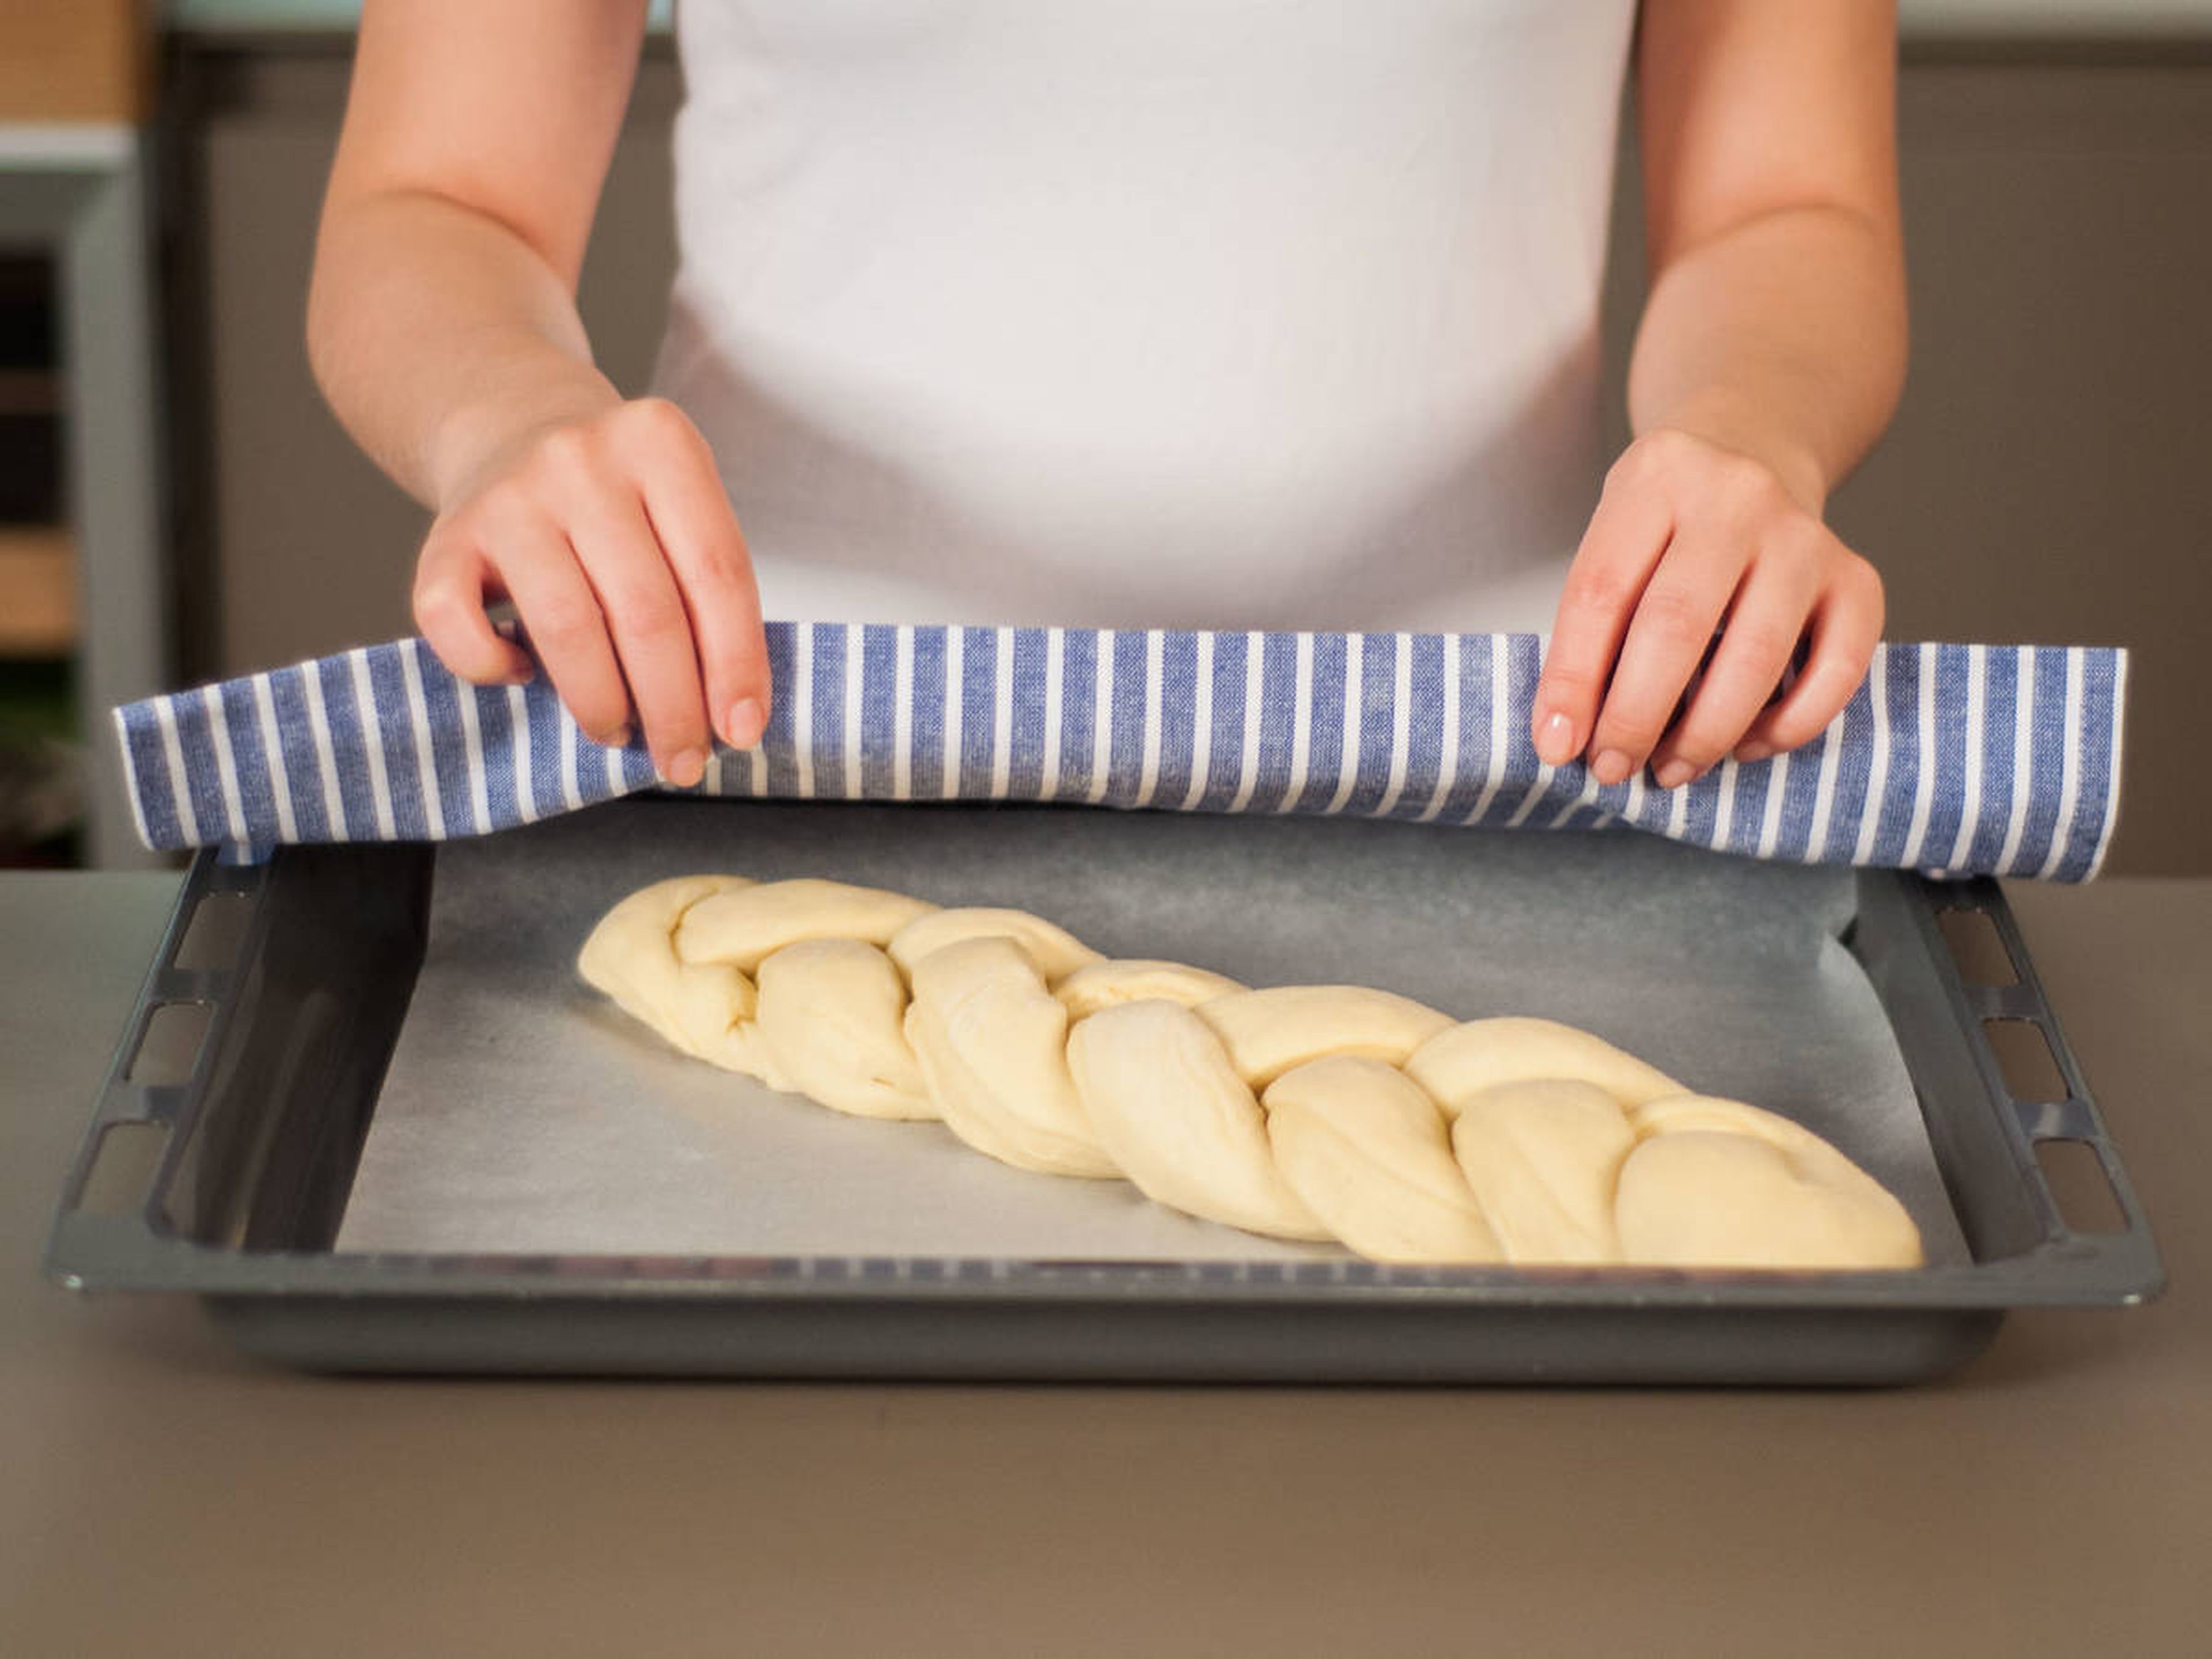 Transfer braid to a lined baking sheet. Cover and allow to rise in a warm place for approx. 45–60 min.